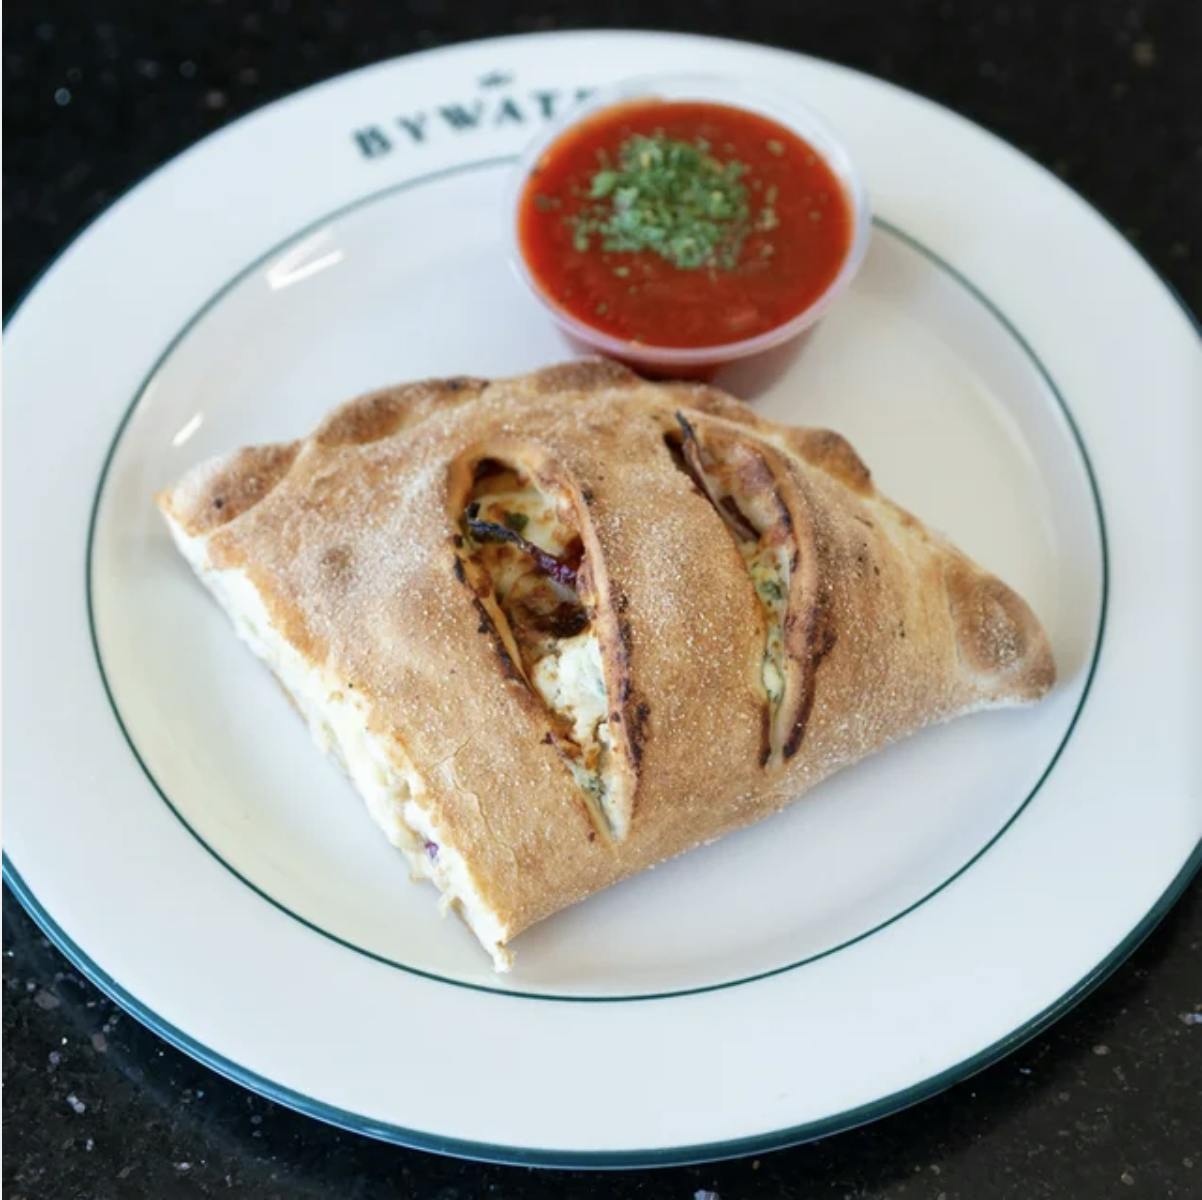 BBQ Chicken Calzone from Aroma Pizza & Pasta in Lake Forest, CA